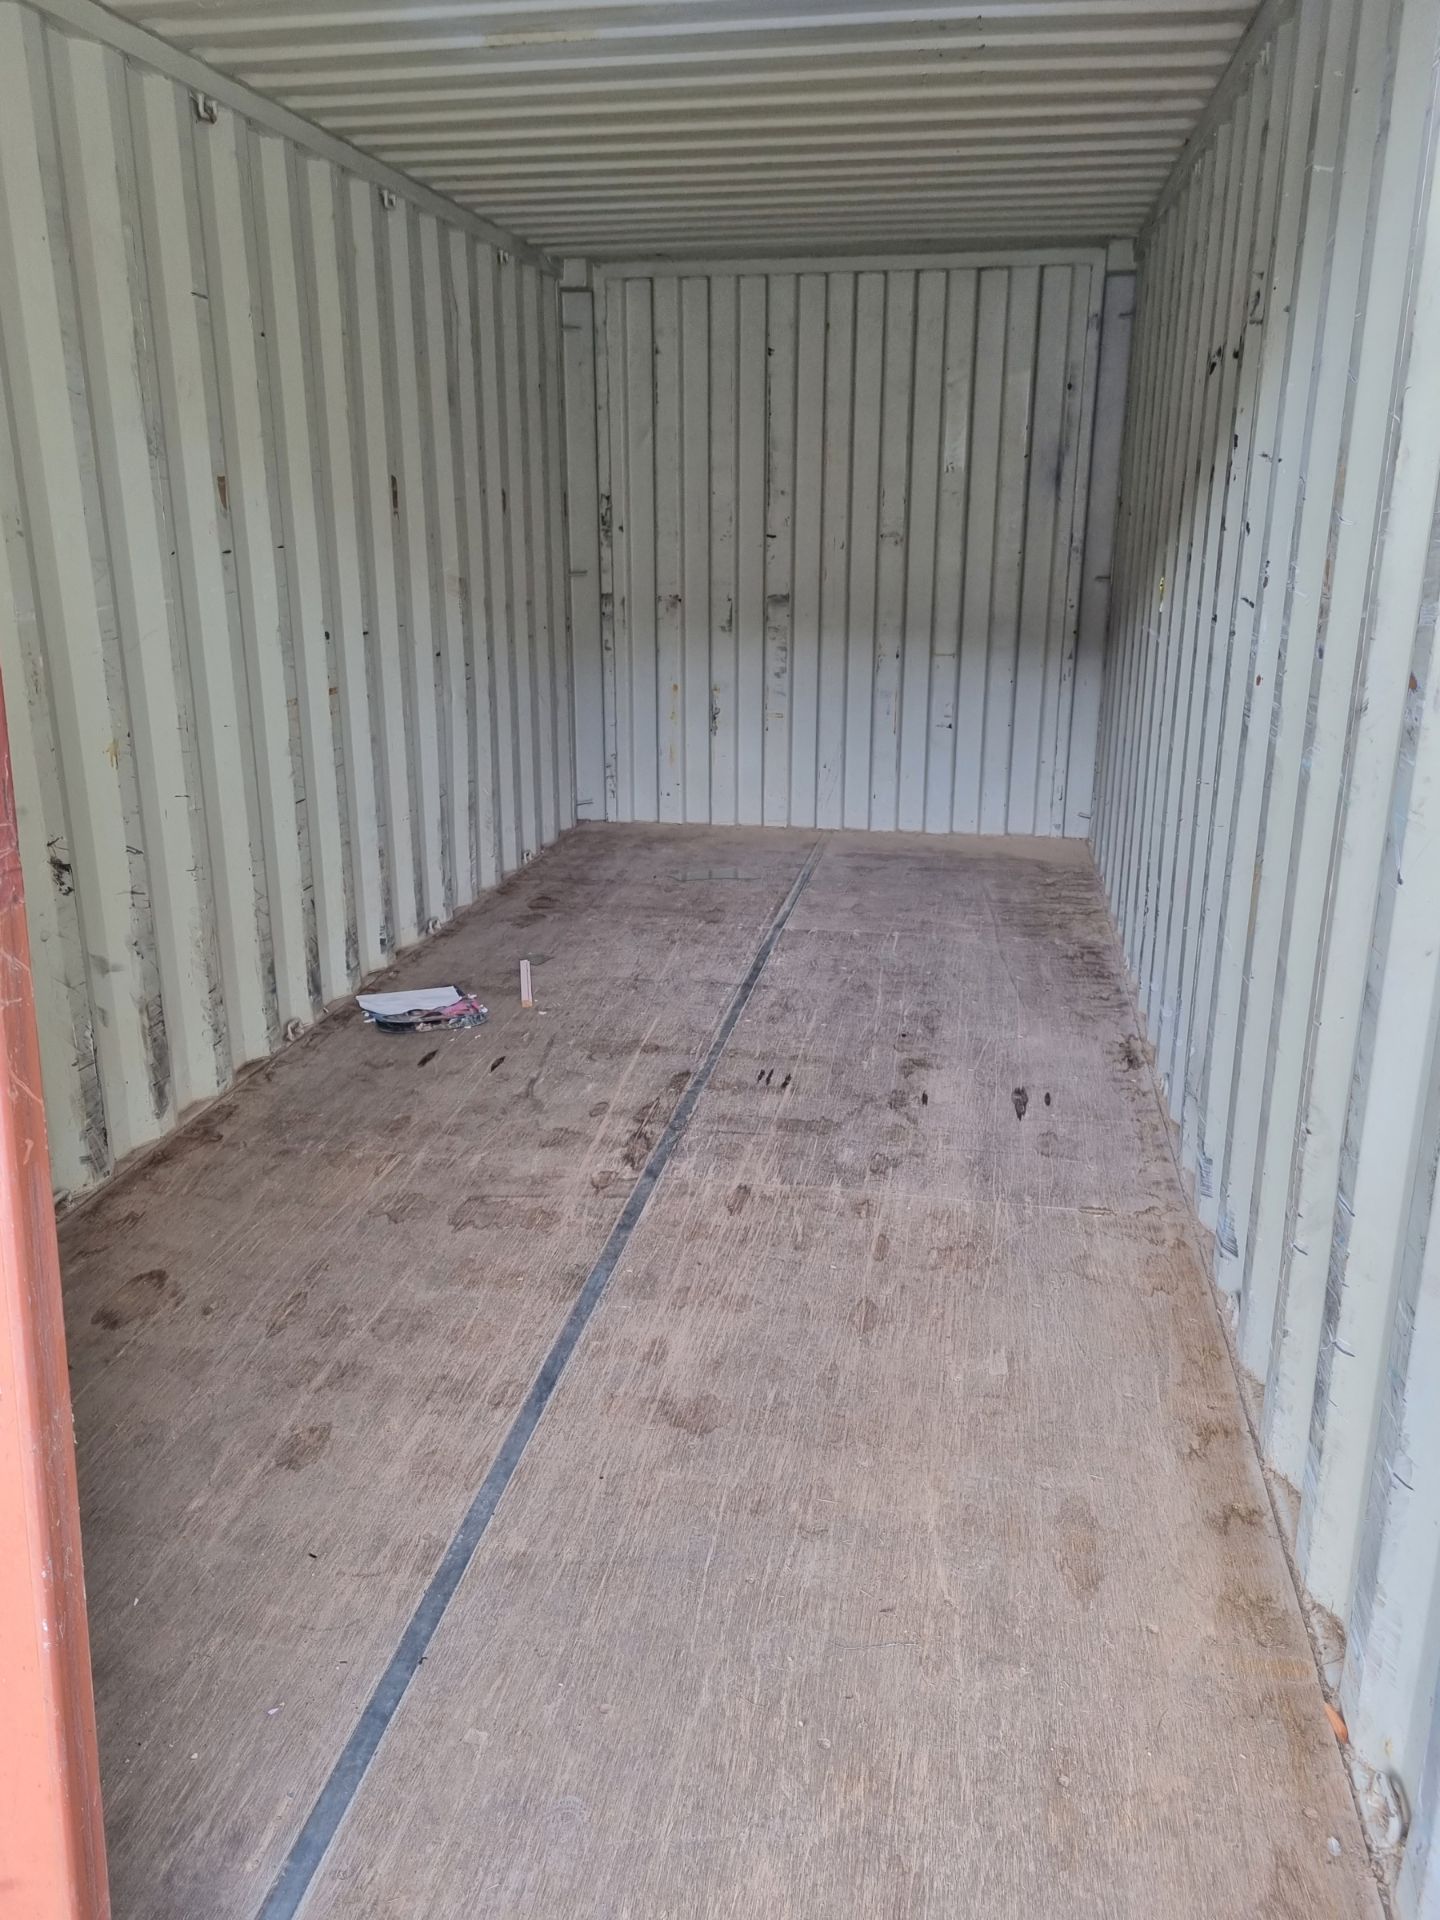 Med Union - Model MU20-1001-TA shipping container - L600 x W240 x H258cm - Image 11 of 12